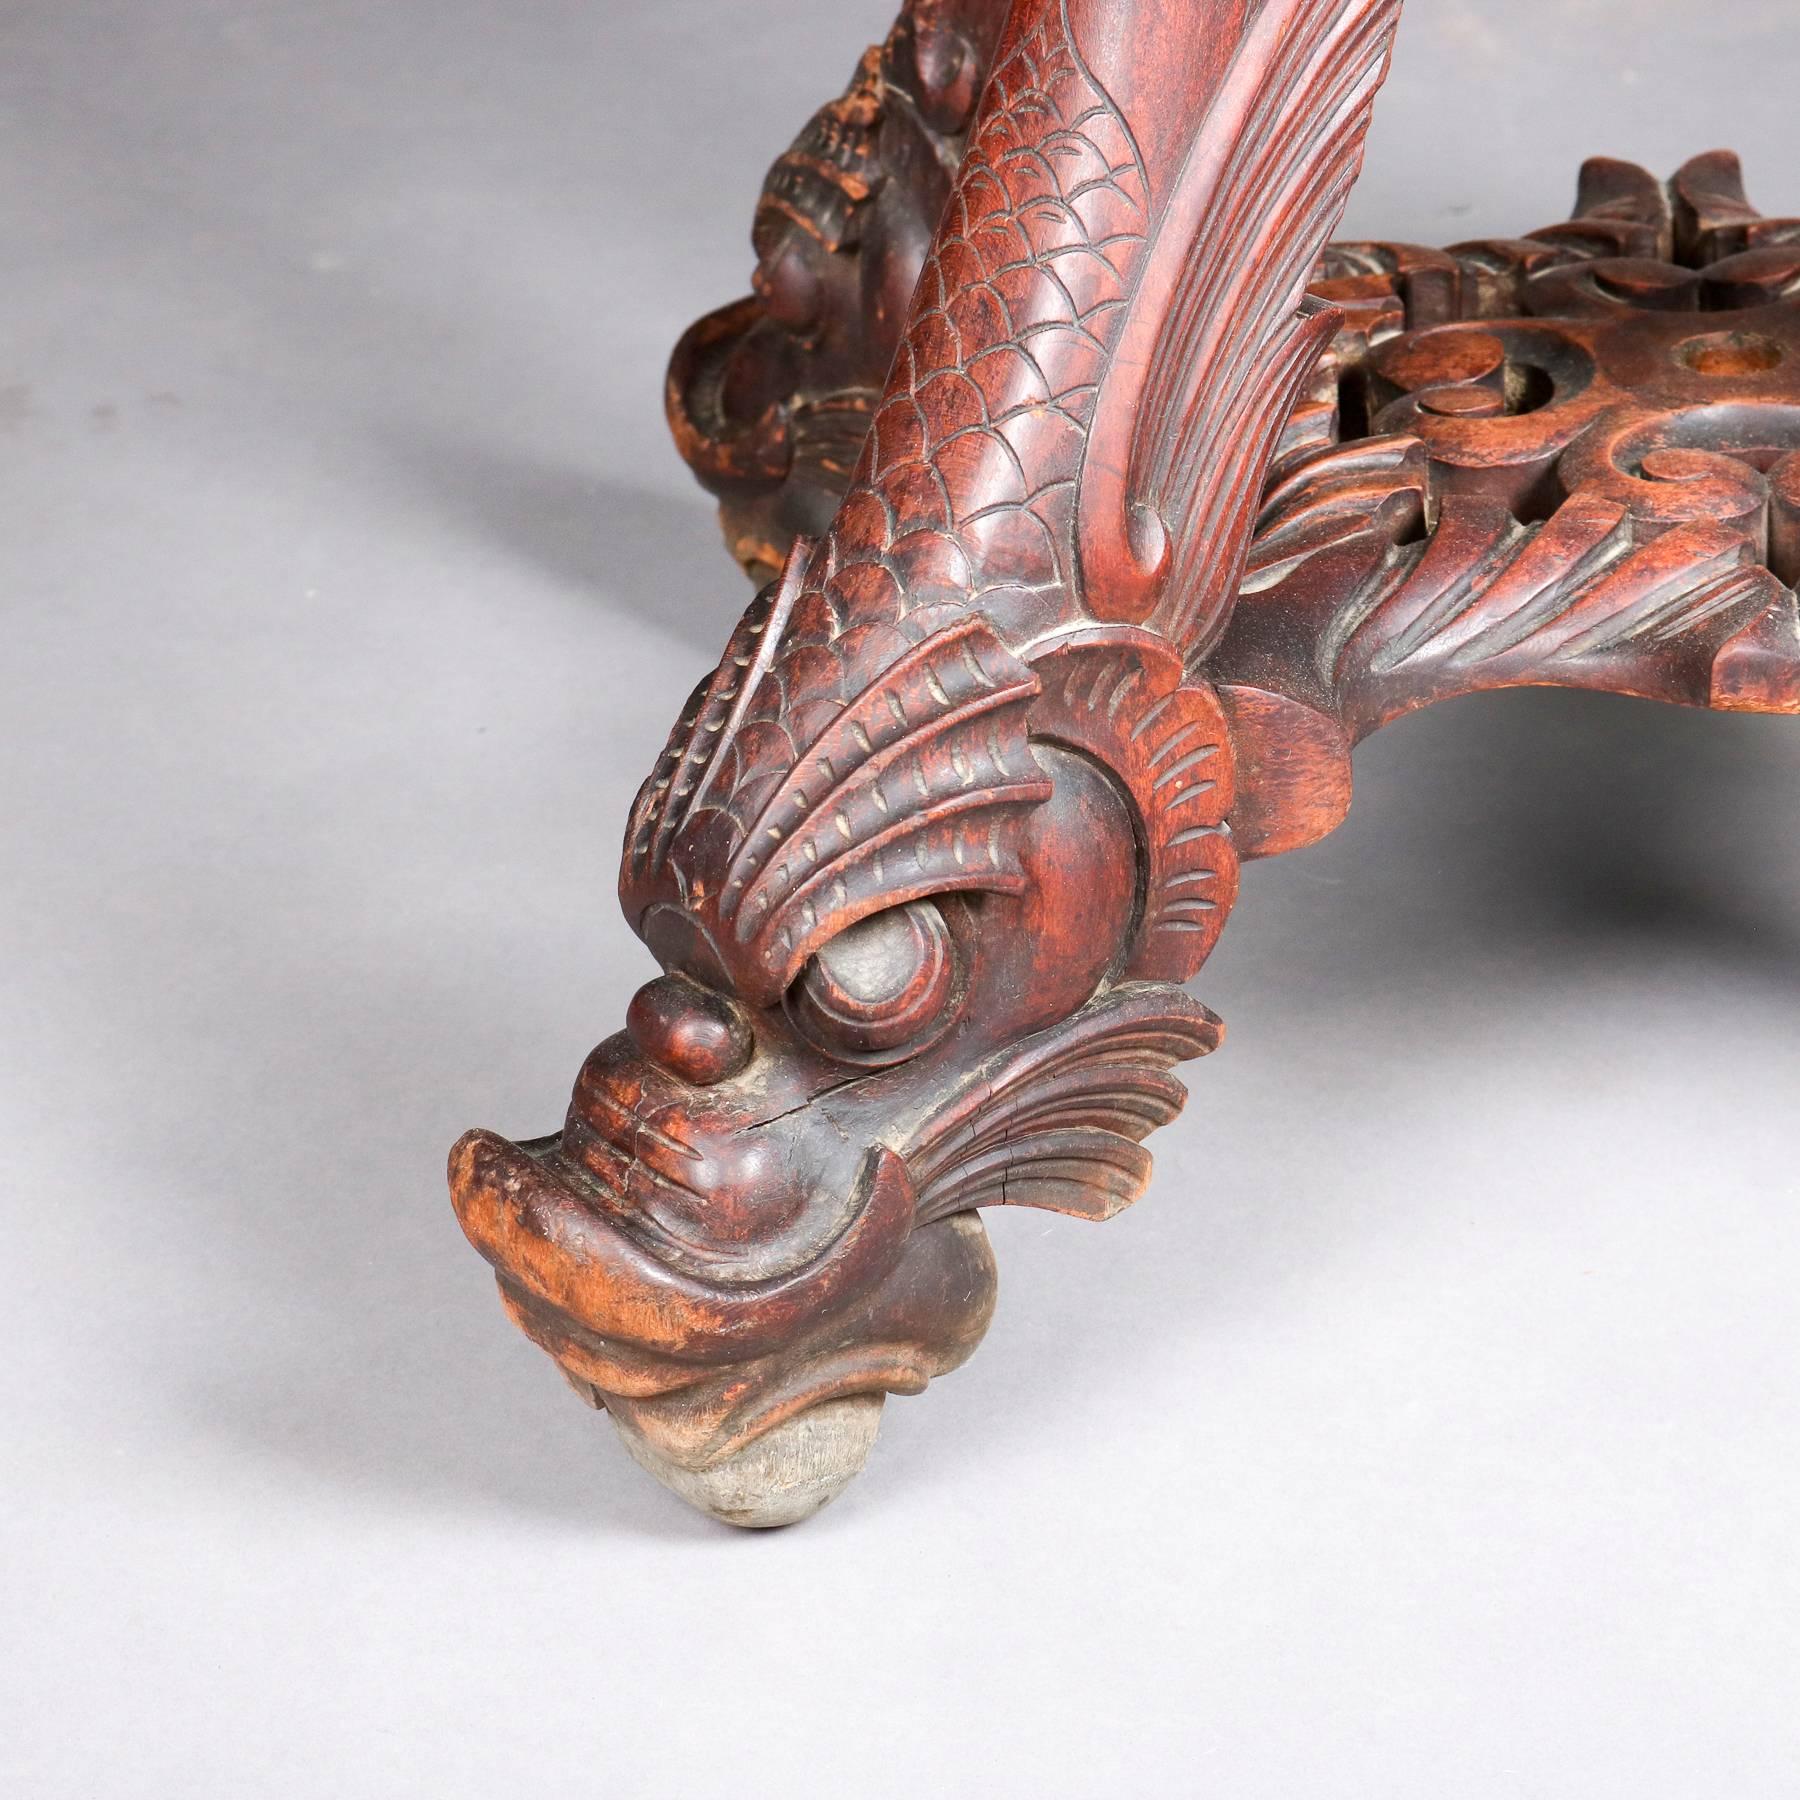 Antique Japanese Meiji plant/jardinière stand features turned upper display atop base of four legs with incised dragon panels and terminating in figural carved ancient dragon heads complete with scales and backswept wings, carved and pierced lower